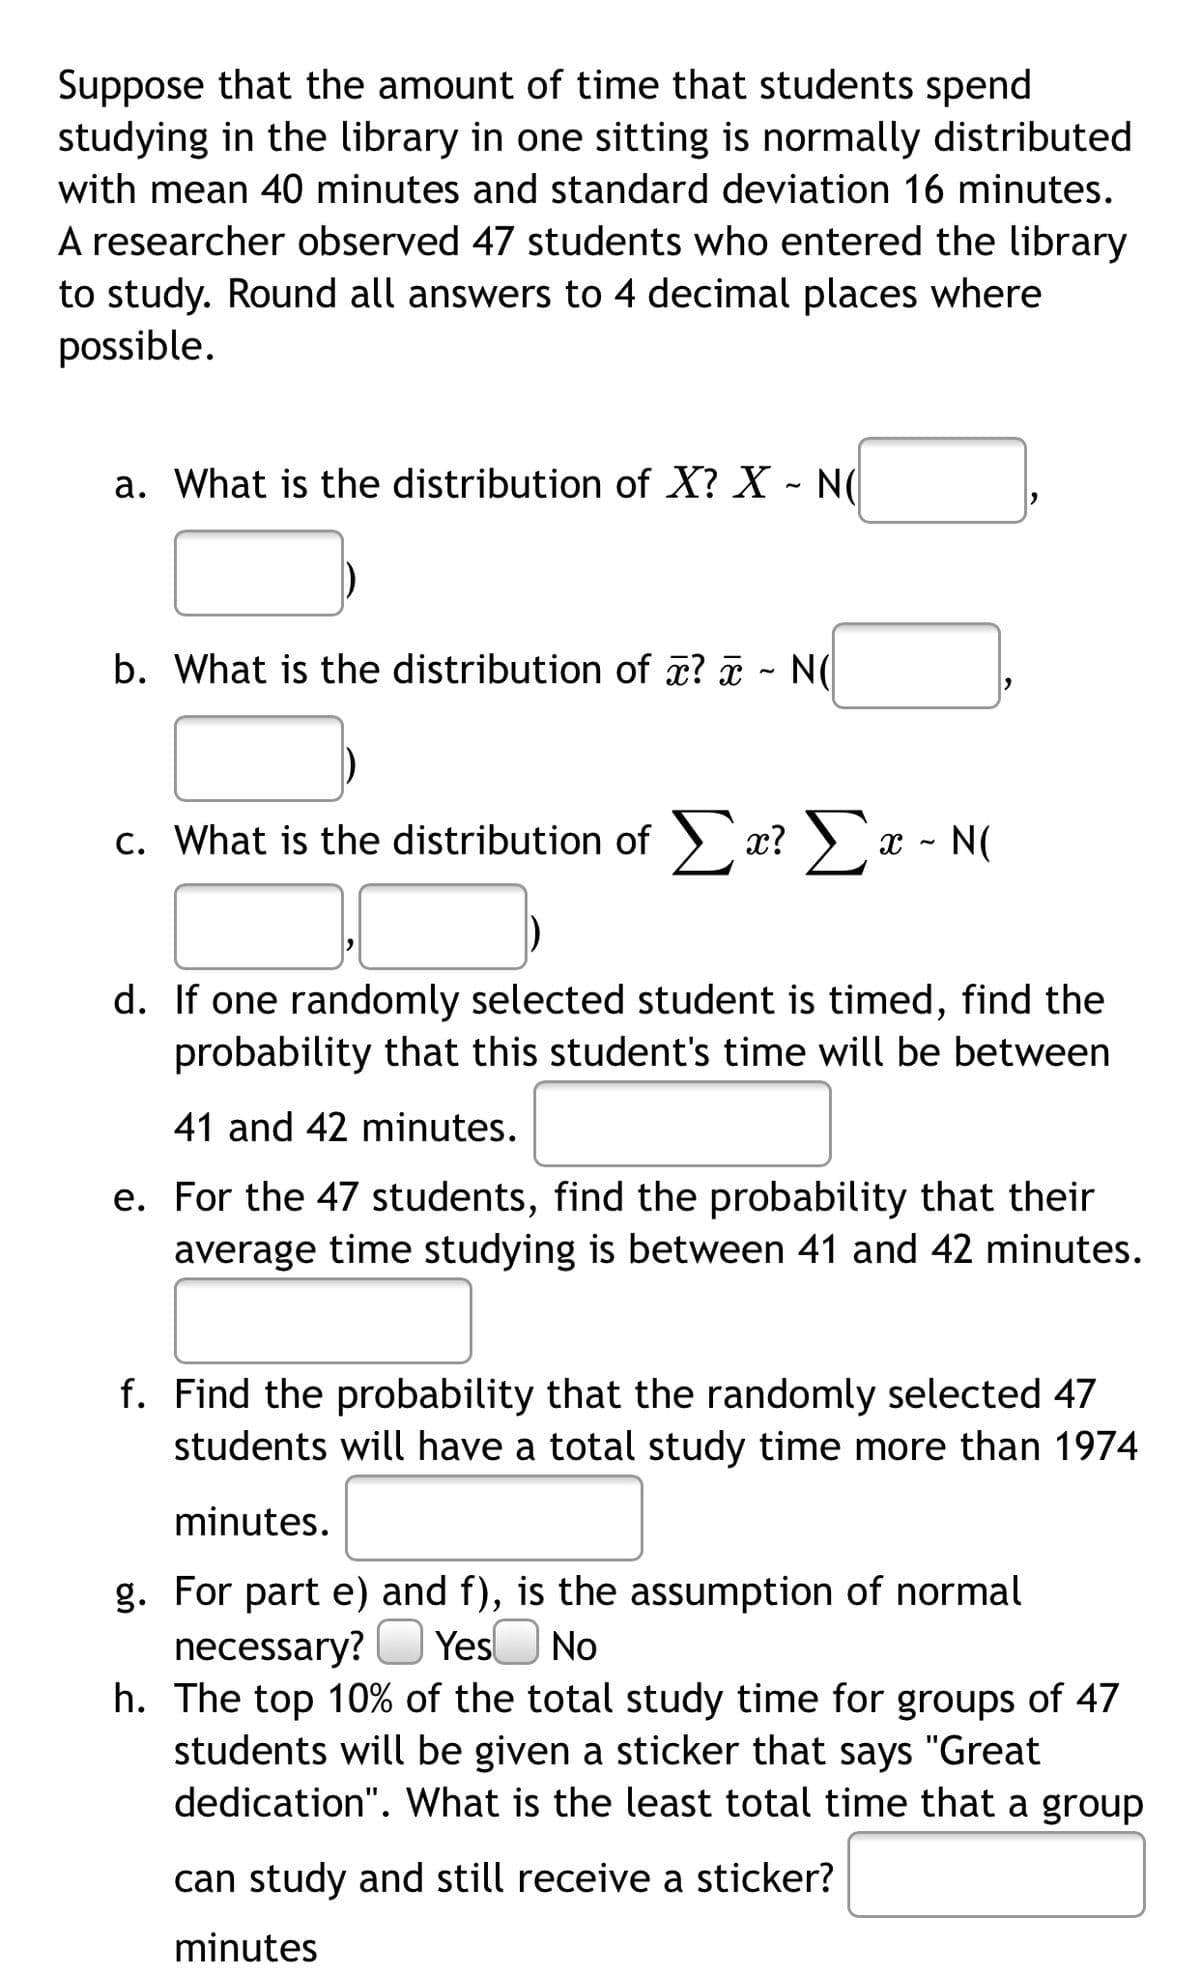 Suppose that the amount of time that students spend
studying in the library in one sitting is normally distributed
with mean 40 minutes and standard deviation 16 minutes.
A researcher observed 47 students who entered the library
to study. Round all answers to 4 decimal places where
possible.
a. What is the distribution of X? X - N(
b. What is the distribution of æ? ¤ - N(
c. What is the distribution of )
x? >x - N(
d. If one randomly selected student is timed, find the
probability that this student's time will be between
41 and 42 minutes.
e. For the 47 students, find the probability that their
average time studying is between 41 and 42 minutes.
f. Find the probability that the randomly selected 47
students will have a total study time more than 1974
minutes.
g. For part e) and f), is the assumption of normal
necessary? O Yes No
h. The top 10% of the total study time for groups of 47
students will be given a sticker that says "Great
dedication". What is the least total time that a group
can study and still receive a sticker?
minutes
